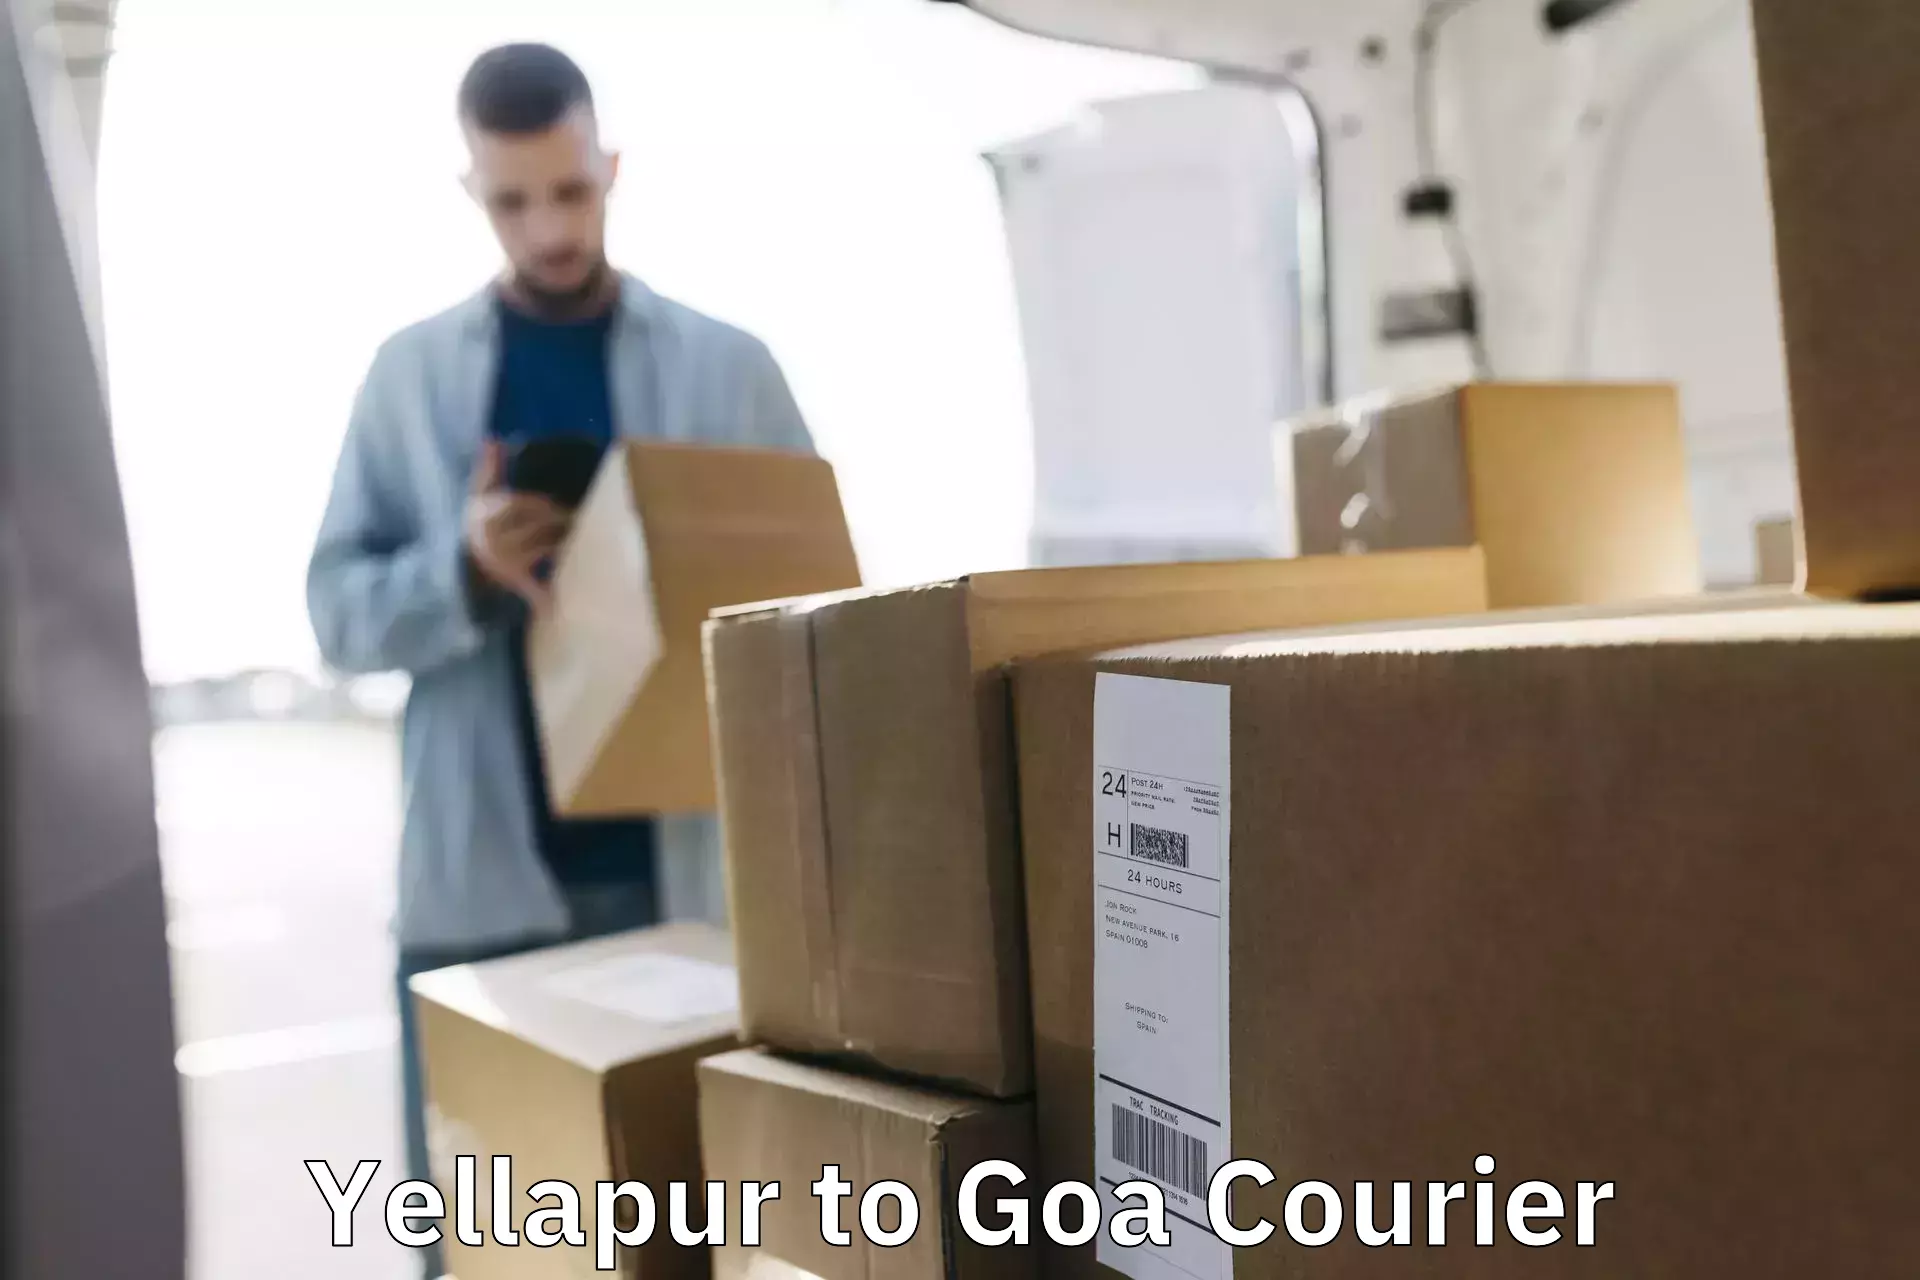 State-of-the-art courier technology Yellapur to Goa